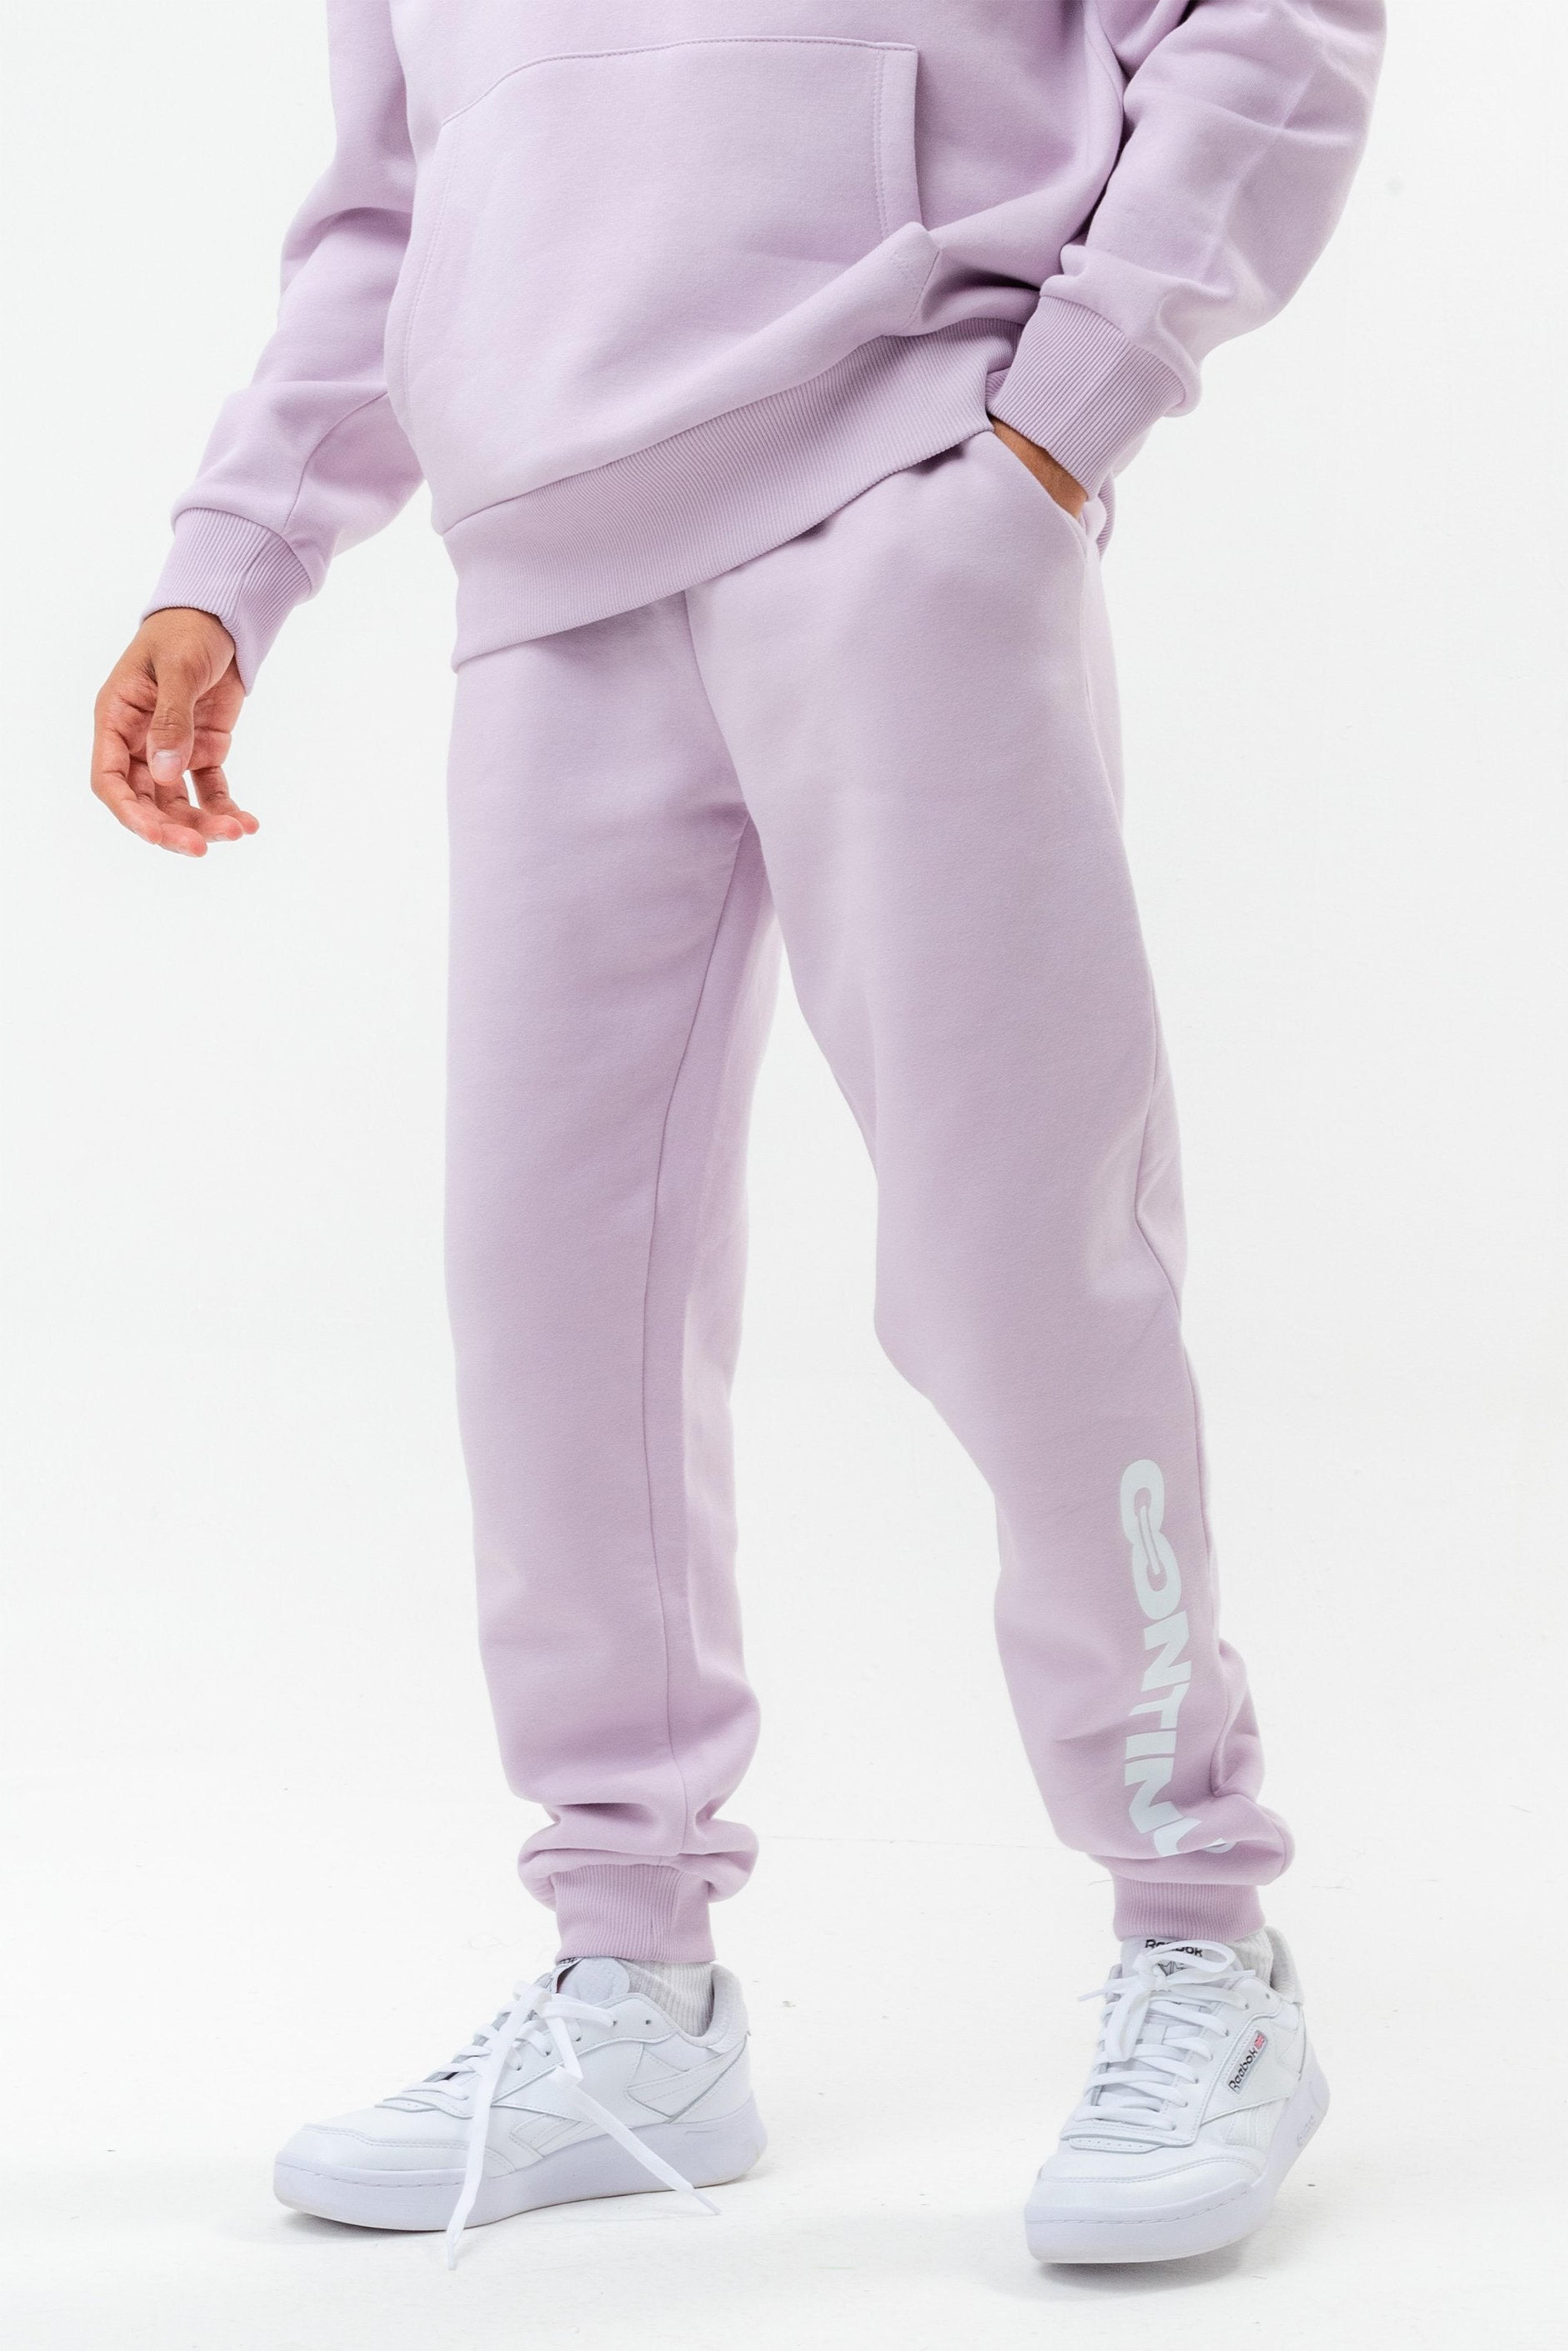 Alternate View 2 of CONTINU8 LILAC JOGGERS